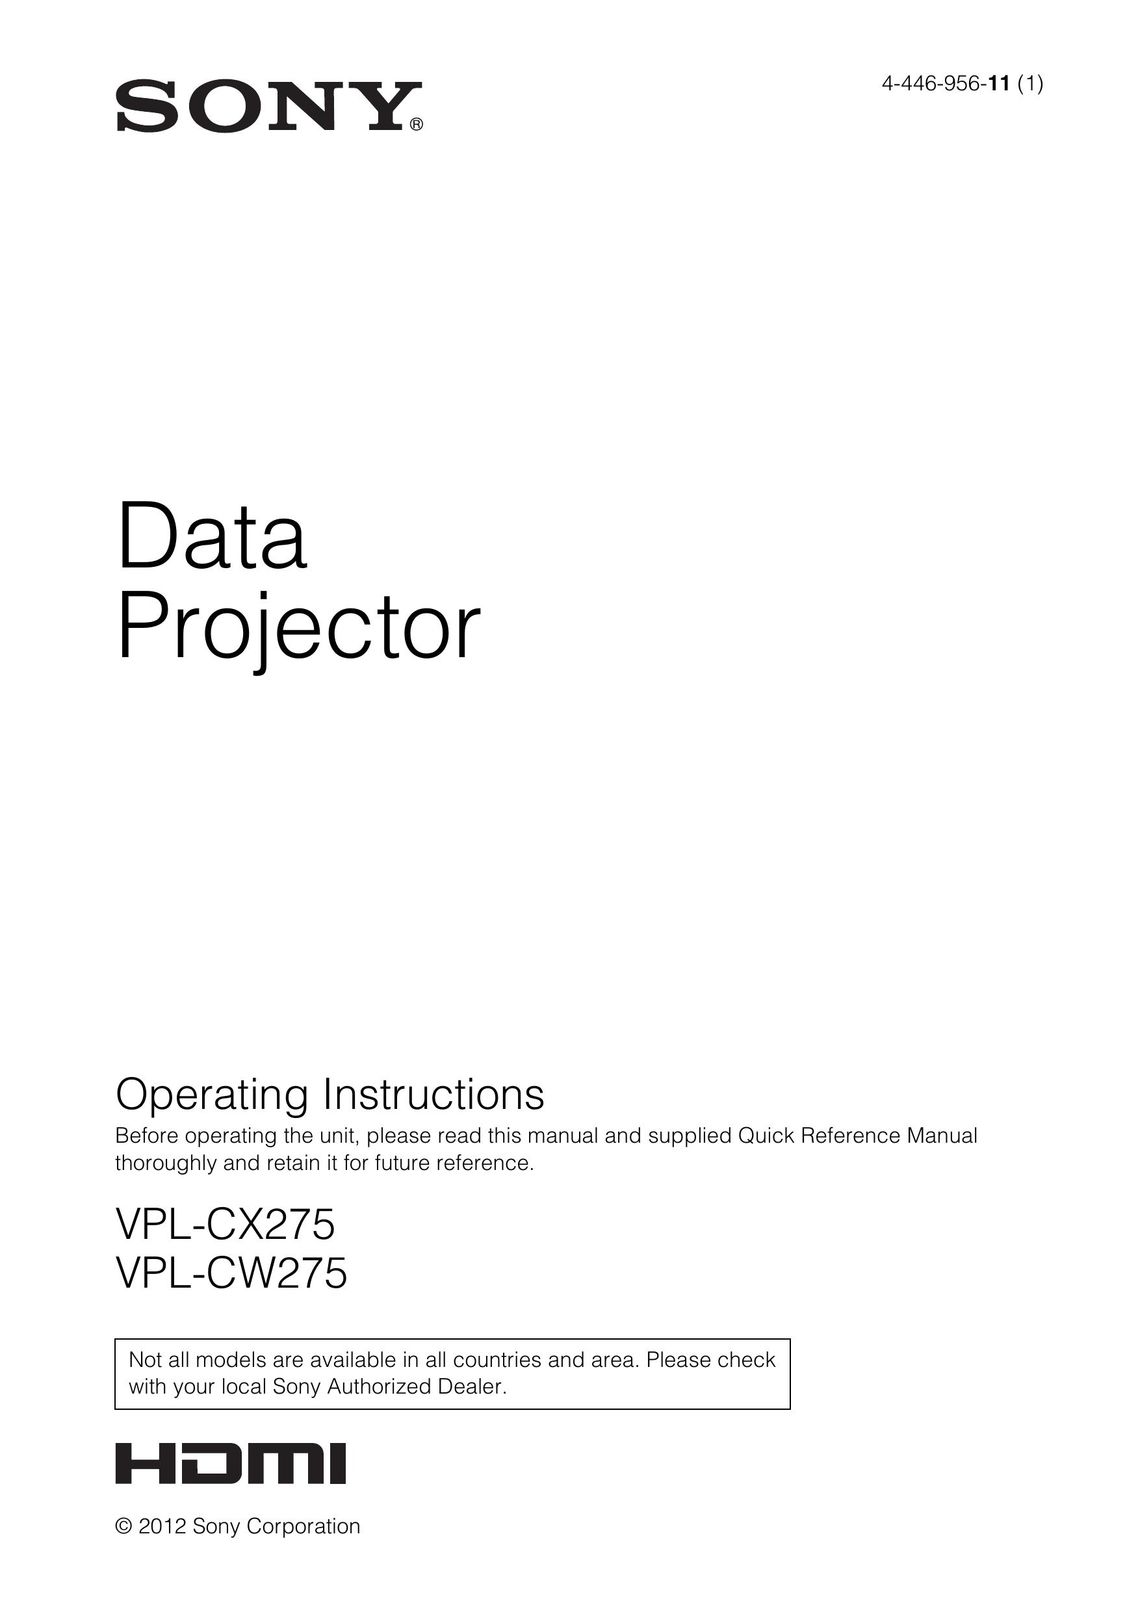 Sony CX275 Projector User Manual